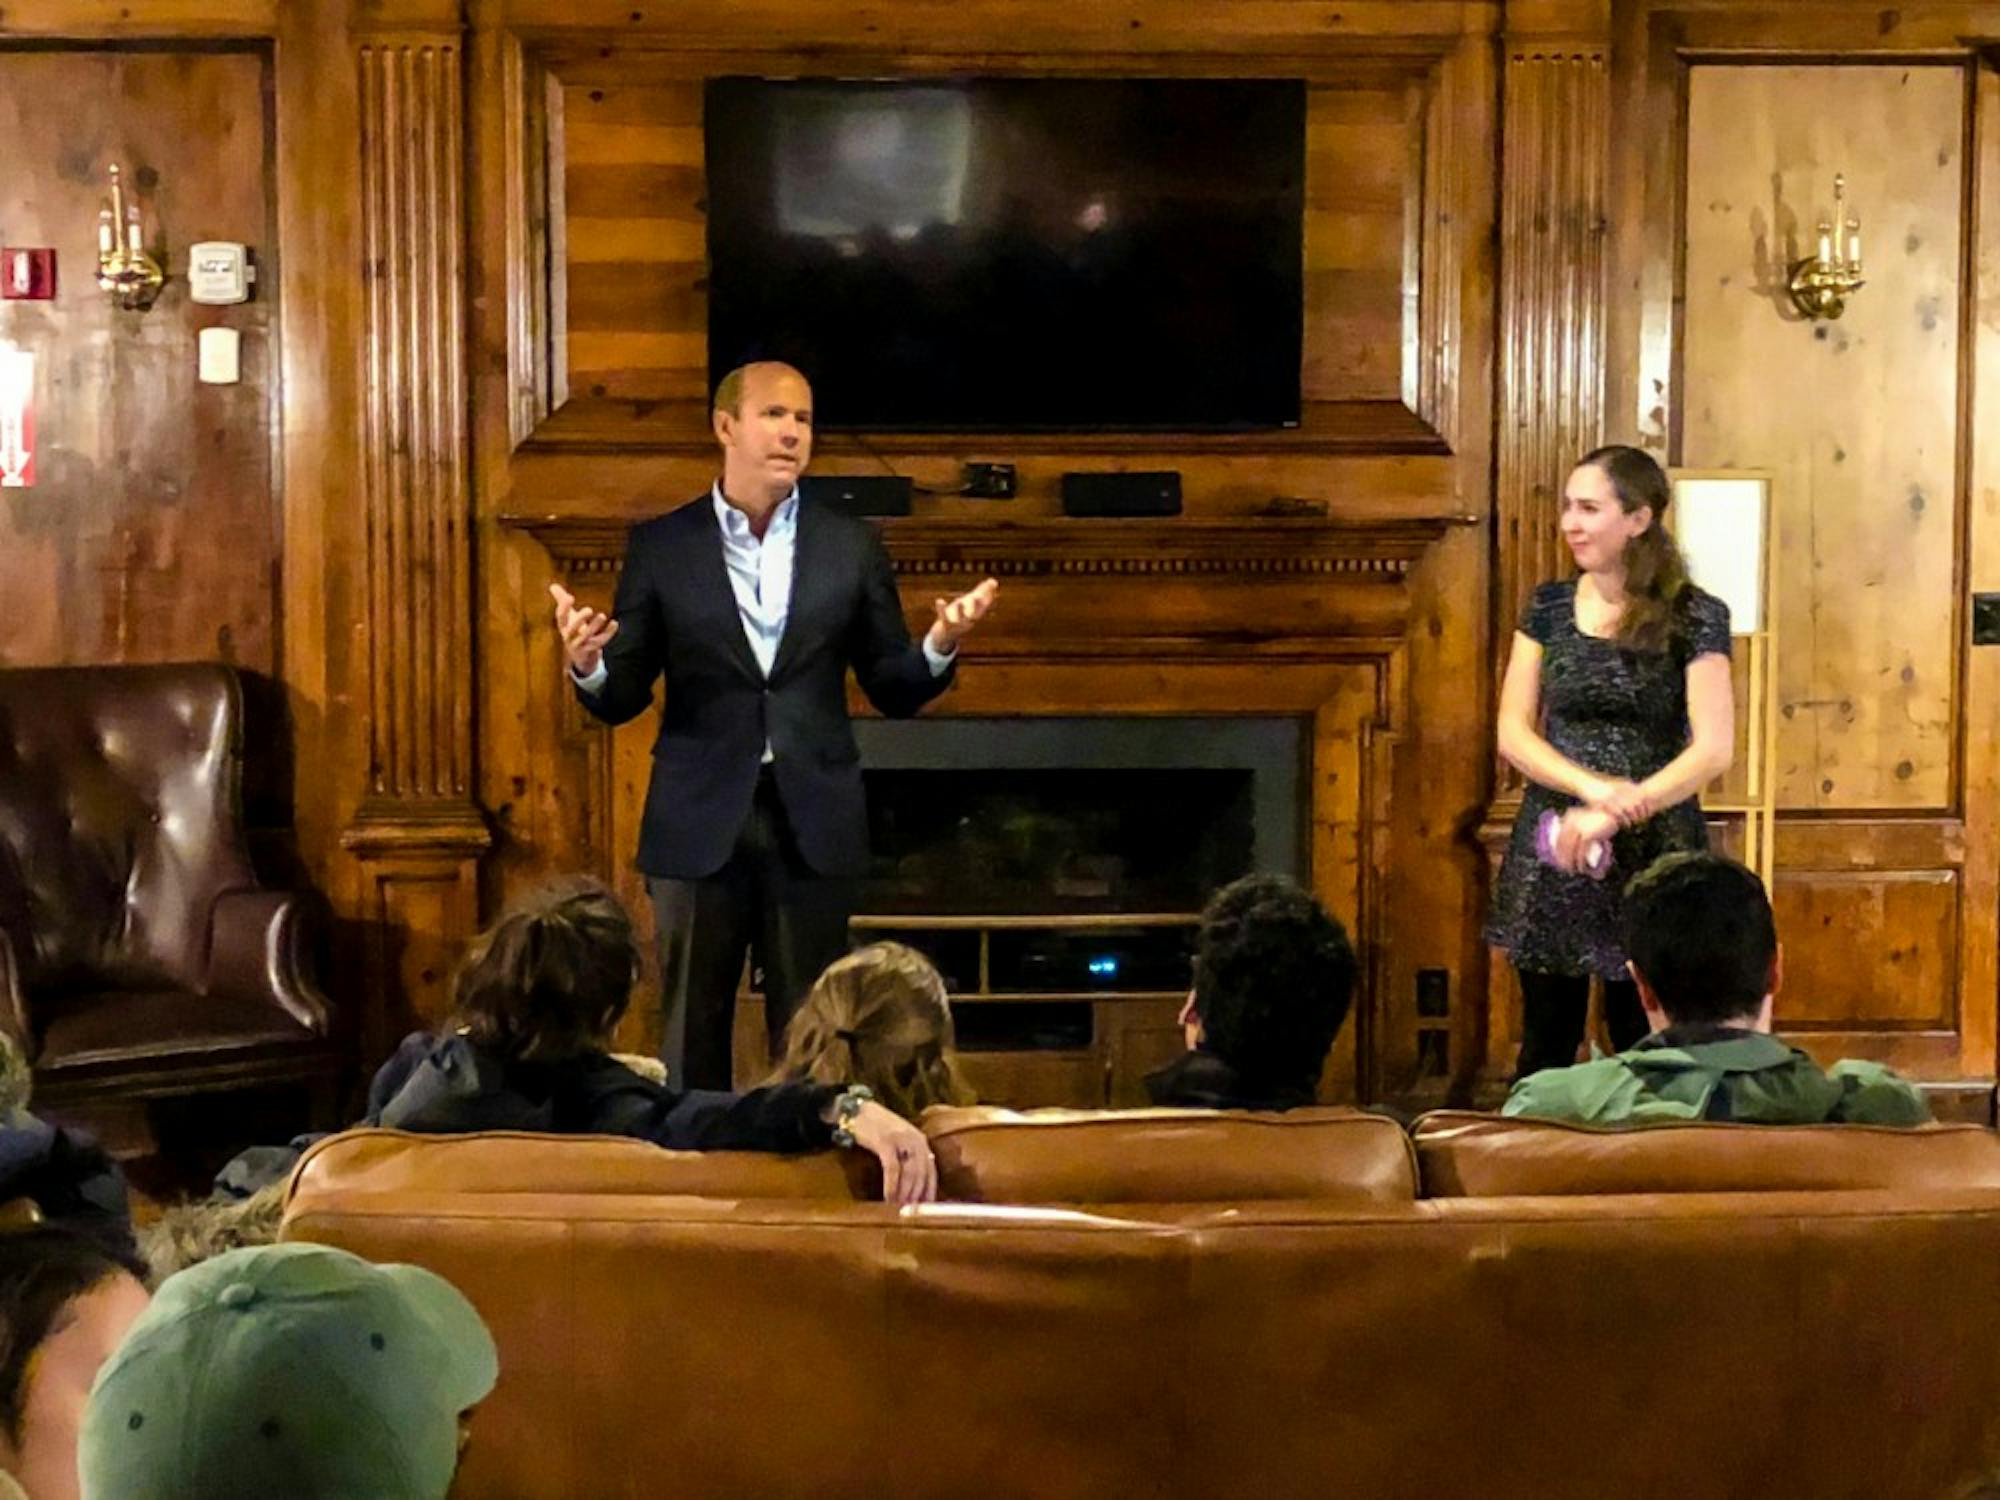 Rep. John Delaney spoke at Beta Alpha Omega fraternity on Monday as part of his campaign for the Democratic presidential nomination.